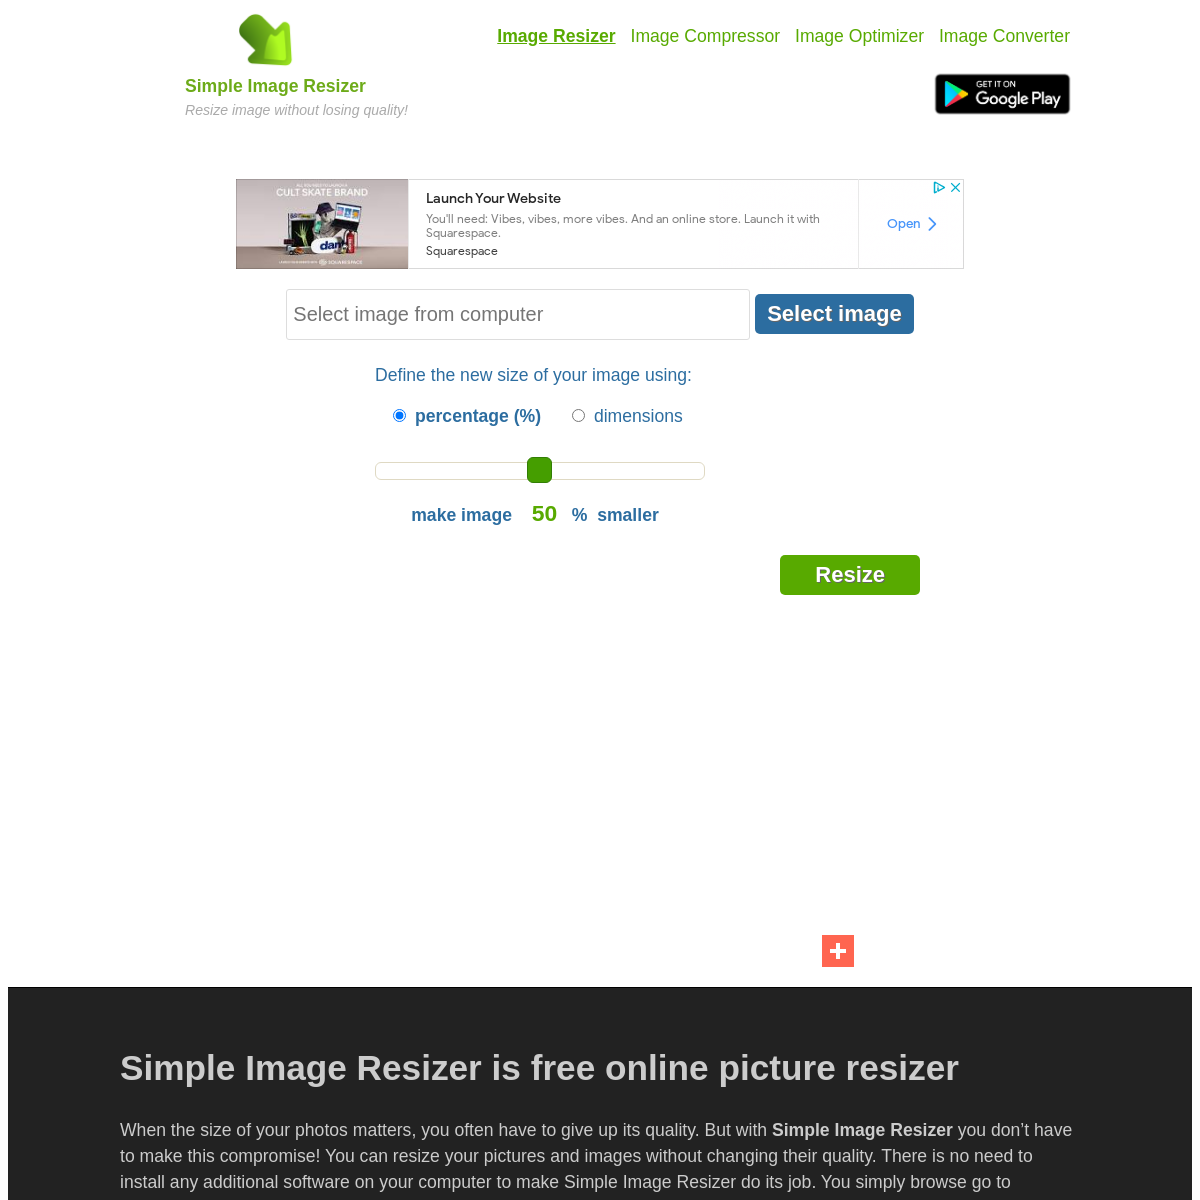 A complete backup of simpleimageresizer.com